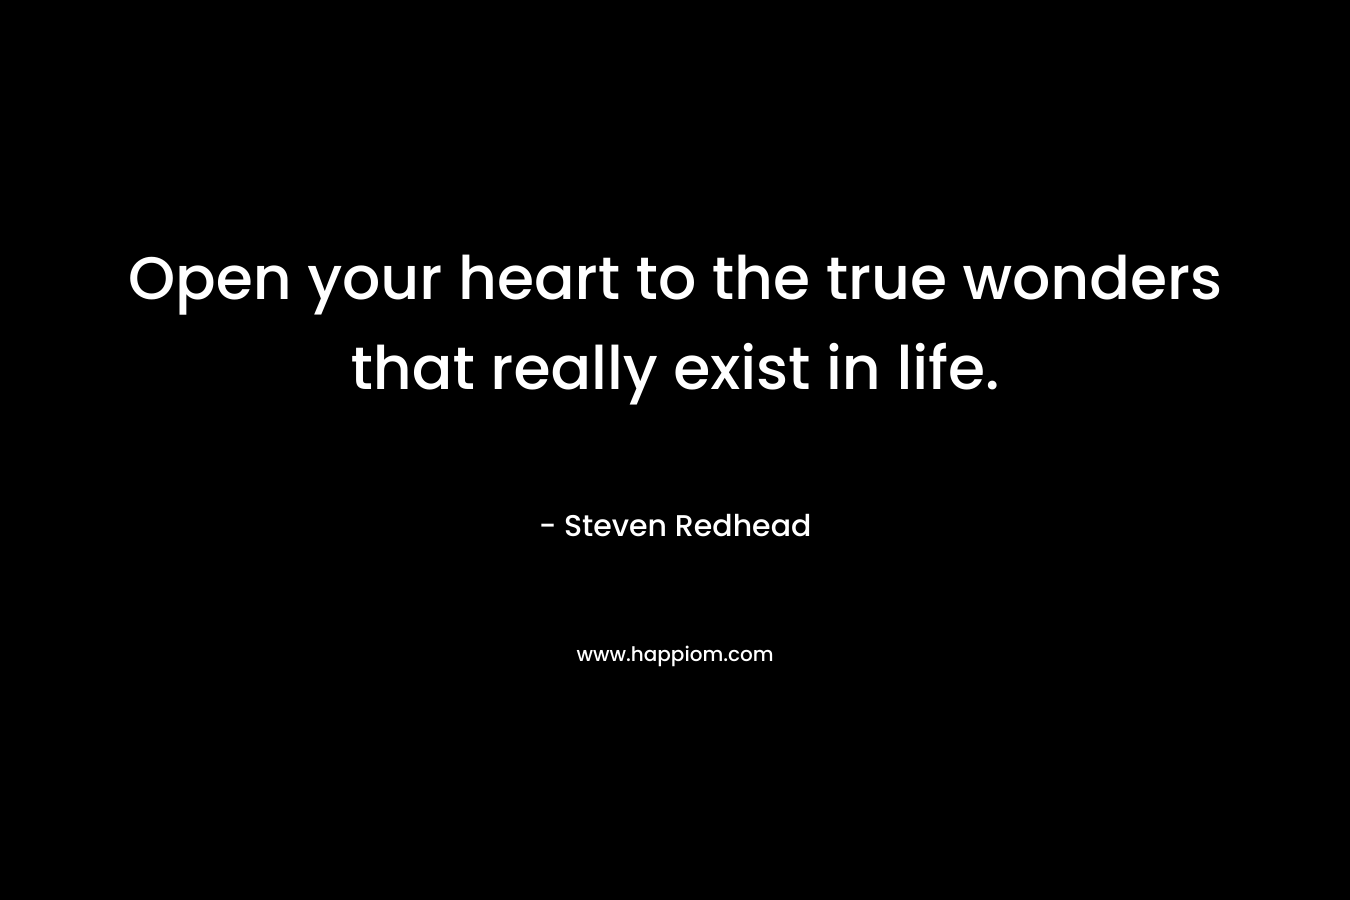 Open your heart to the true wonders that really exist in life.